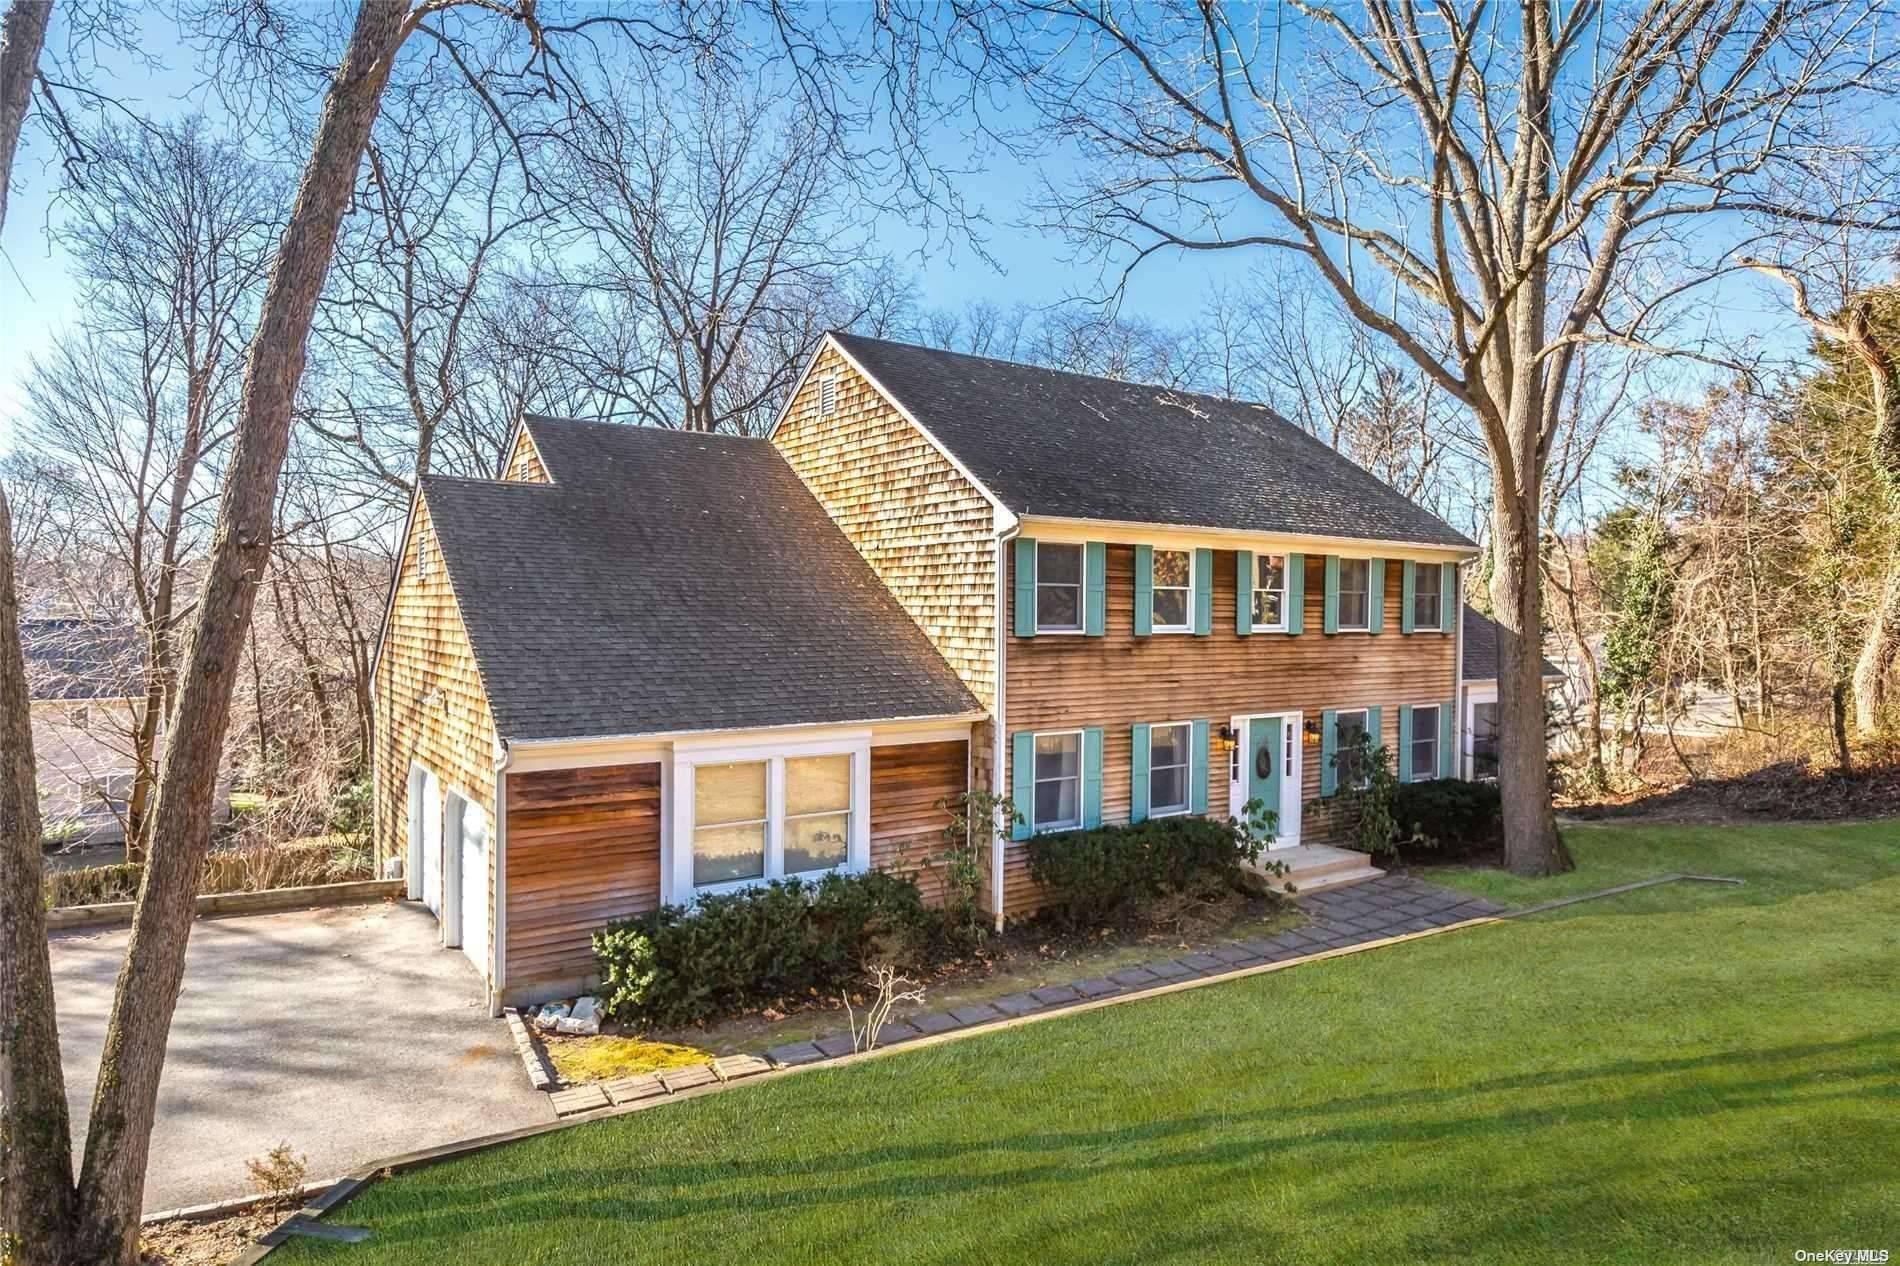 3, 100 sq ft center hall colonial on point.